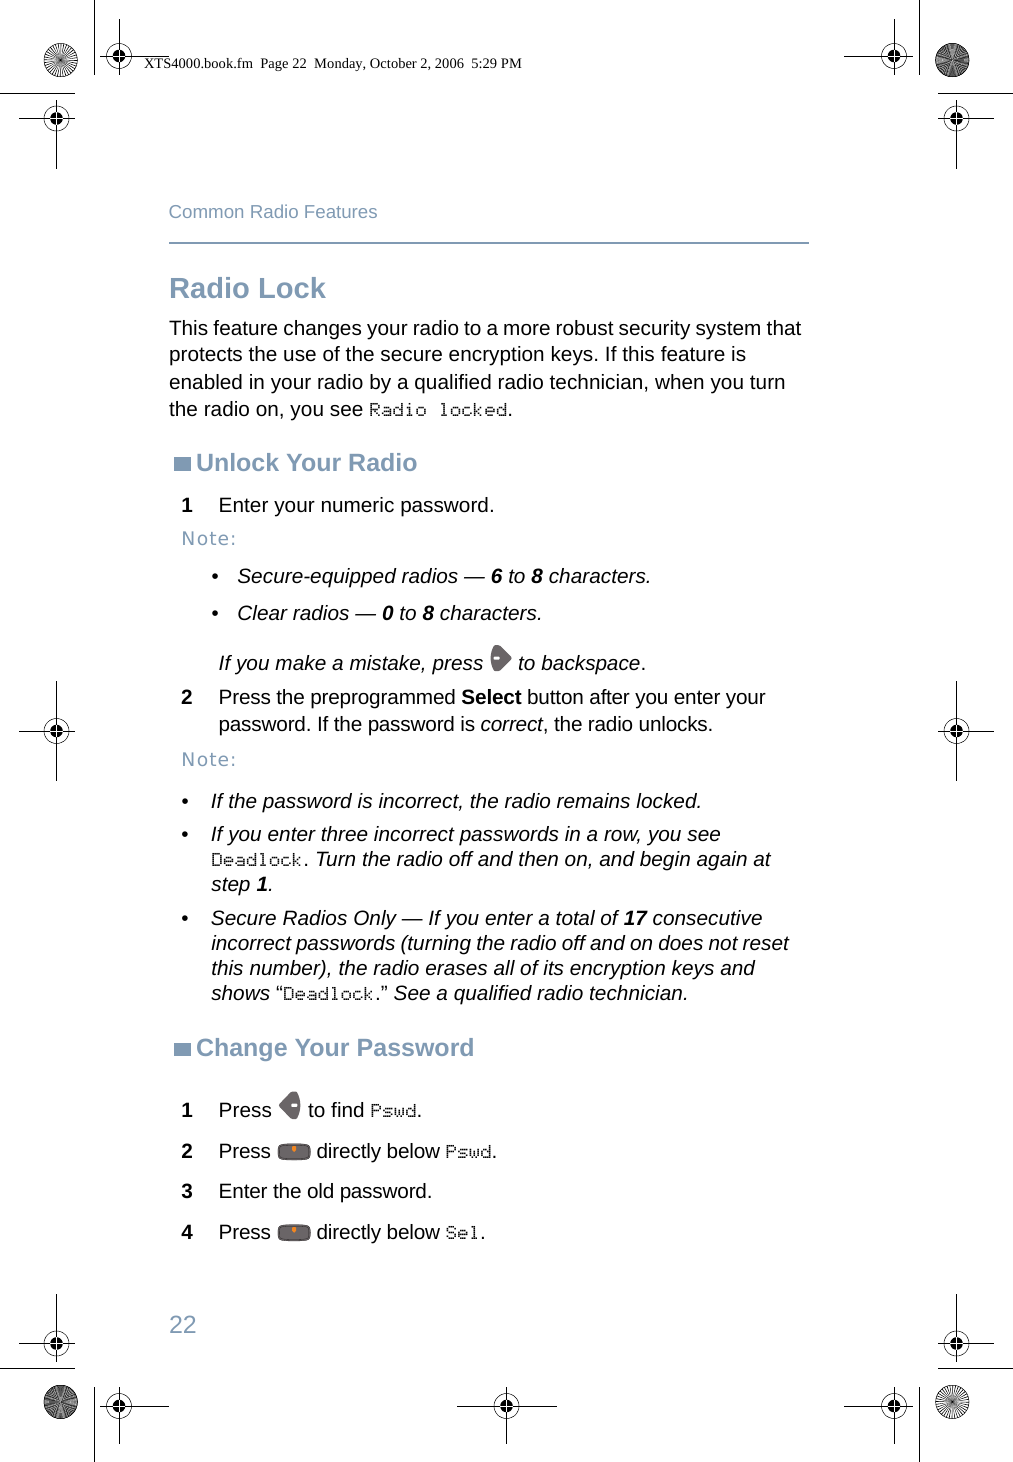 22Common Radio FeaturesRadio LockThis feature changes your radio to a more robust security system that protects the use of the secure encryption keys. If this feature is enabled in your radio by a qualified radio technician, when you turn the radio on, you see Radio locked.Unlock Your RadioChange Your Password1Enter your numeric password.Note:• Secure-equipped radios — 6 to 8 characters.• Clear radios — 0 to 8 characters.If you make a mistake, press   to backspace.2Press the preprogrammed Select button after you enter your password. If the password is correct, the radio unlocks. Note:• If the password is incorrect, the radio remains locked.•If you enter three incorrect passwords in a row, you see Deadlock. Turn the radio off and then on, and begin again at step 1.•Secure Radios Only — If you enter a total of 17 consecutive incorrect passwords (turning the radio off and on does not reset this number), the radio erases all of its encryption keys and shows “Deadlock.” See a qualified radio technician.1Press   to find Pswd.2Press   directly below Pswd. 3Enter the old password.4Press   directly below Sel.XTS4000.book.fm  Page 22  Monday, October 2, 2006  5:29 PM